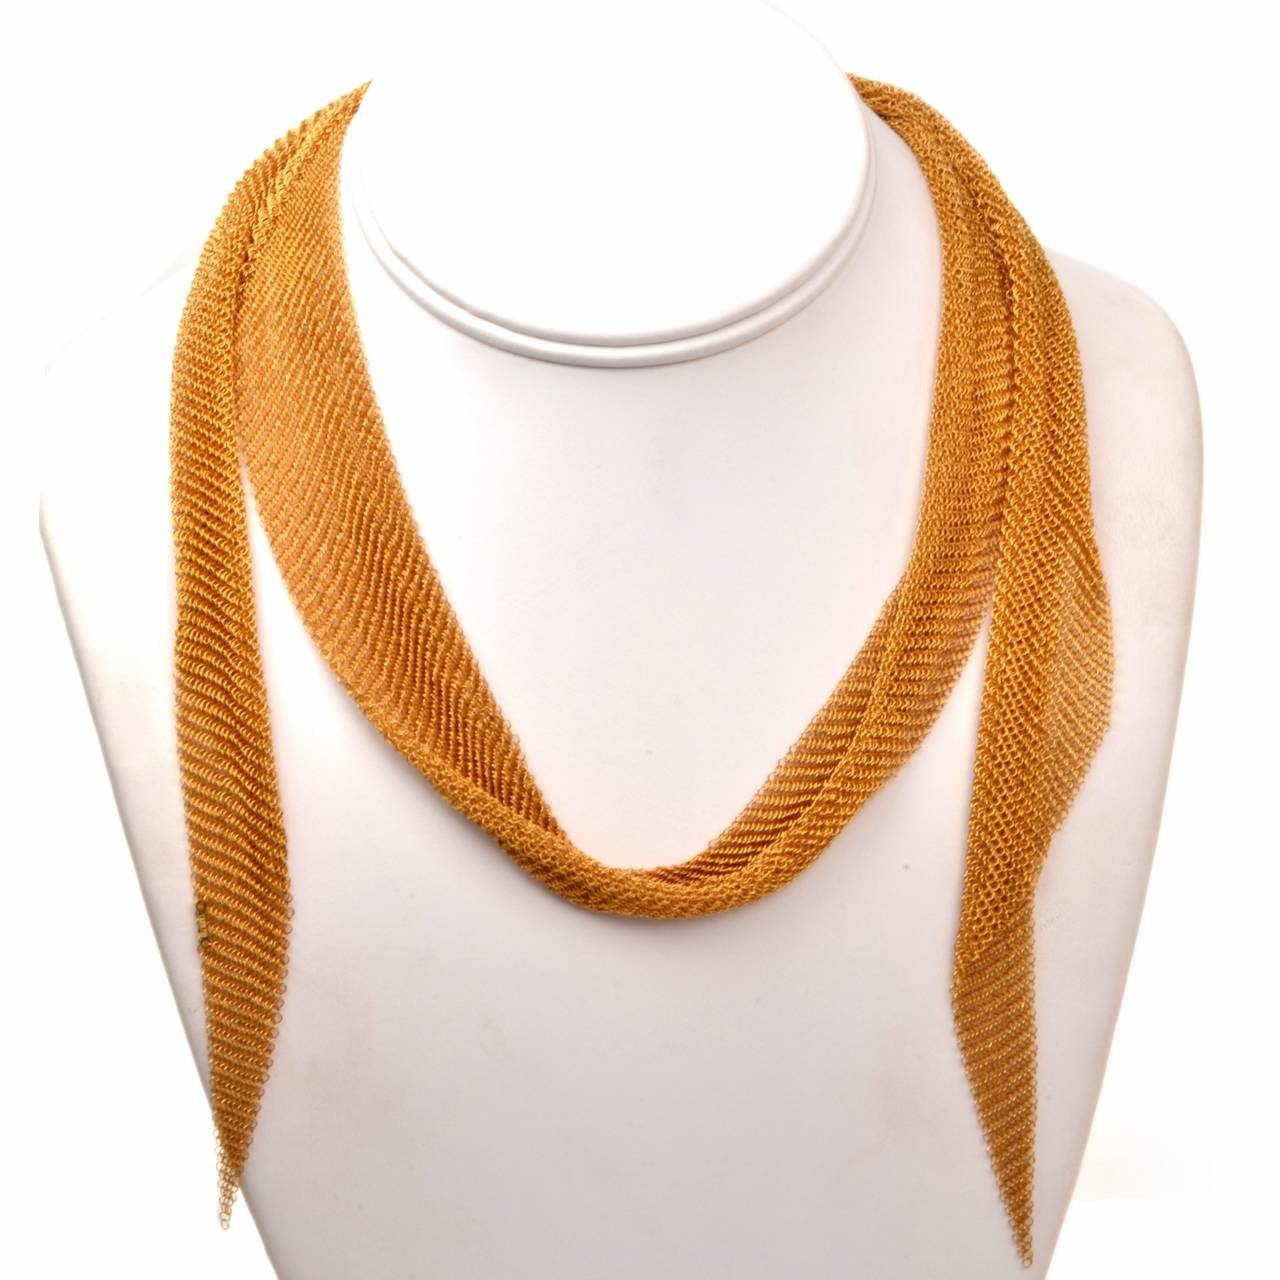 This authentic Elsa Peretti scarf necklace designed for and manufactured by Tiffany & Co. is crafted in solid 18K yellow gold. Like most of Peretti's mesh gold collection which was inspired in Jaipur, India, this enchantingly delicate scarf necklace